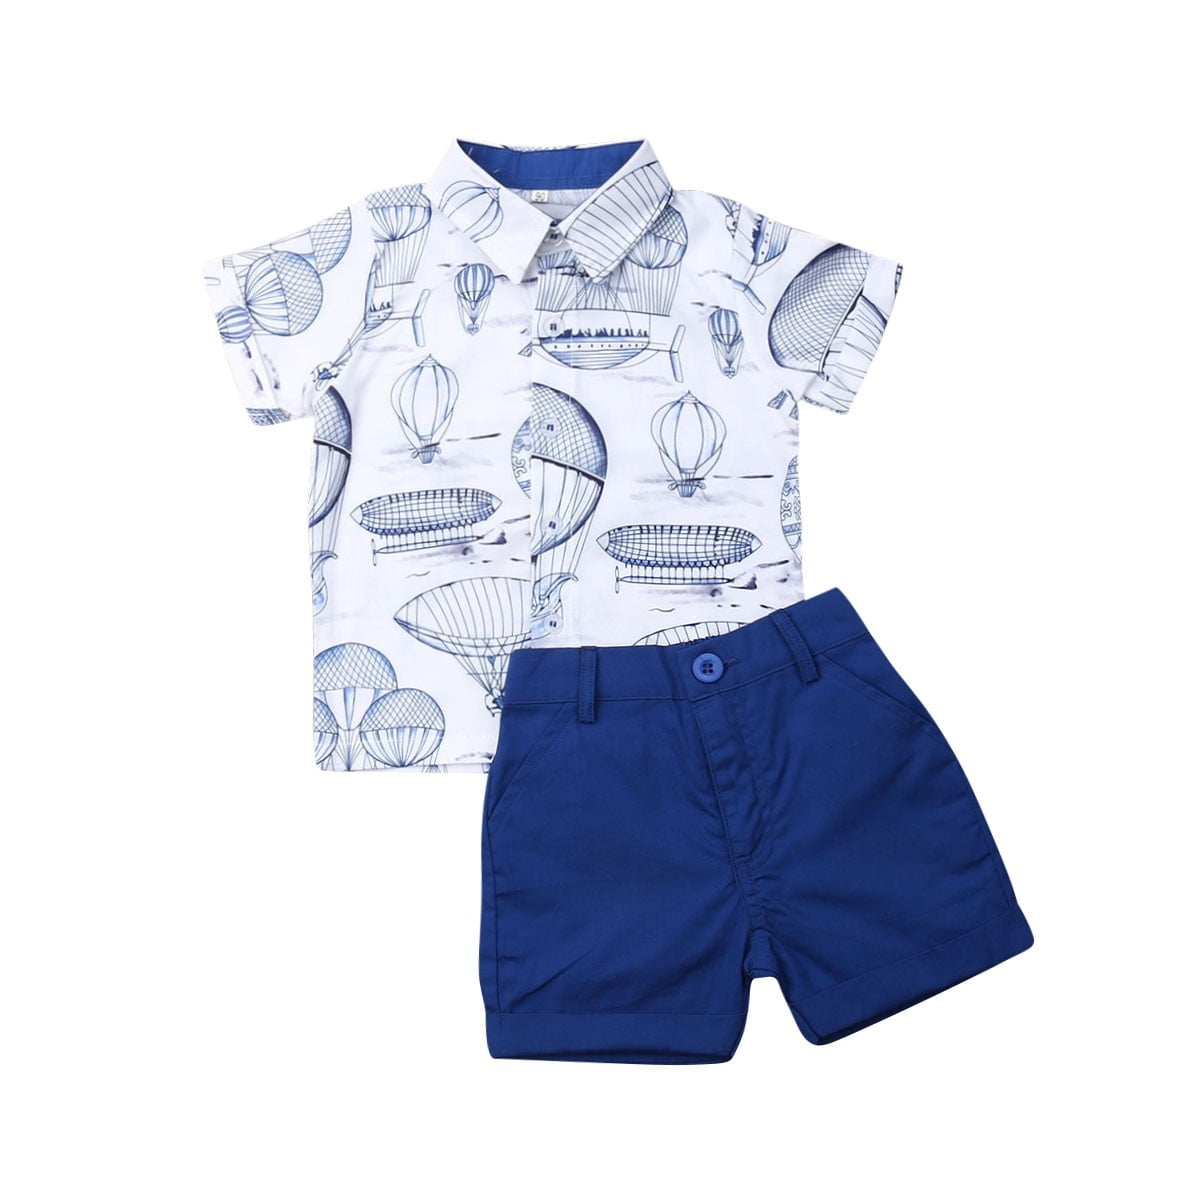 Fashion Baby Boys Outfits Suits,Infant Print Button Down Shirt+Shorts ...